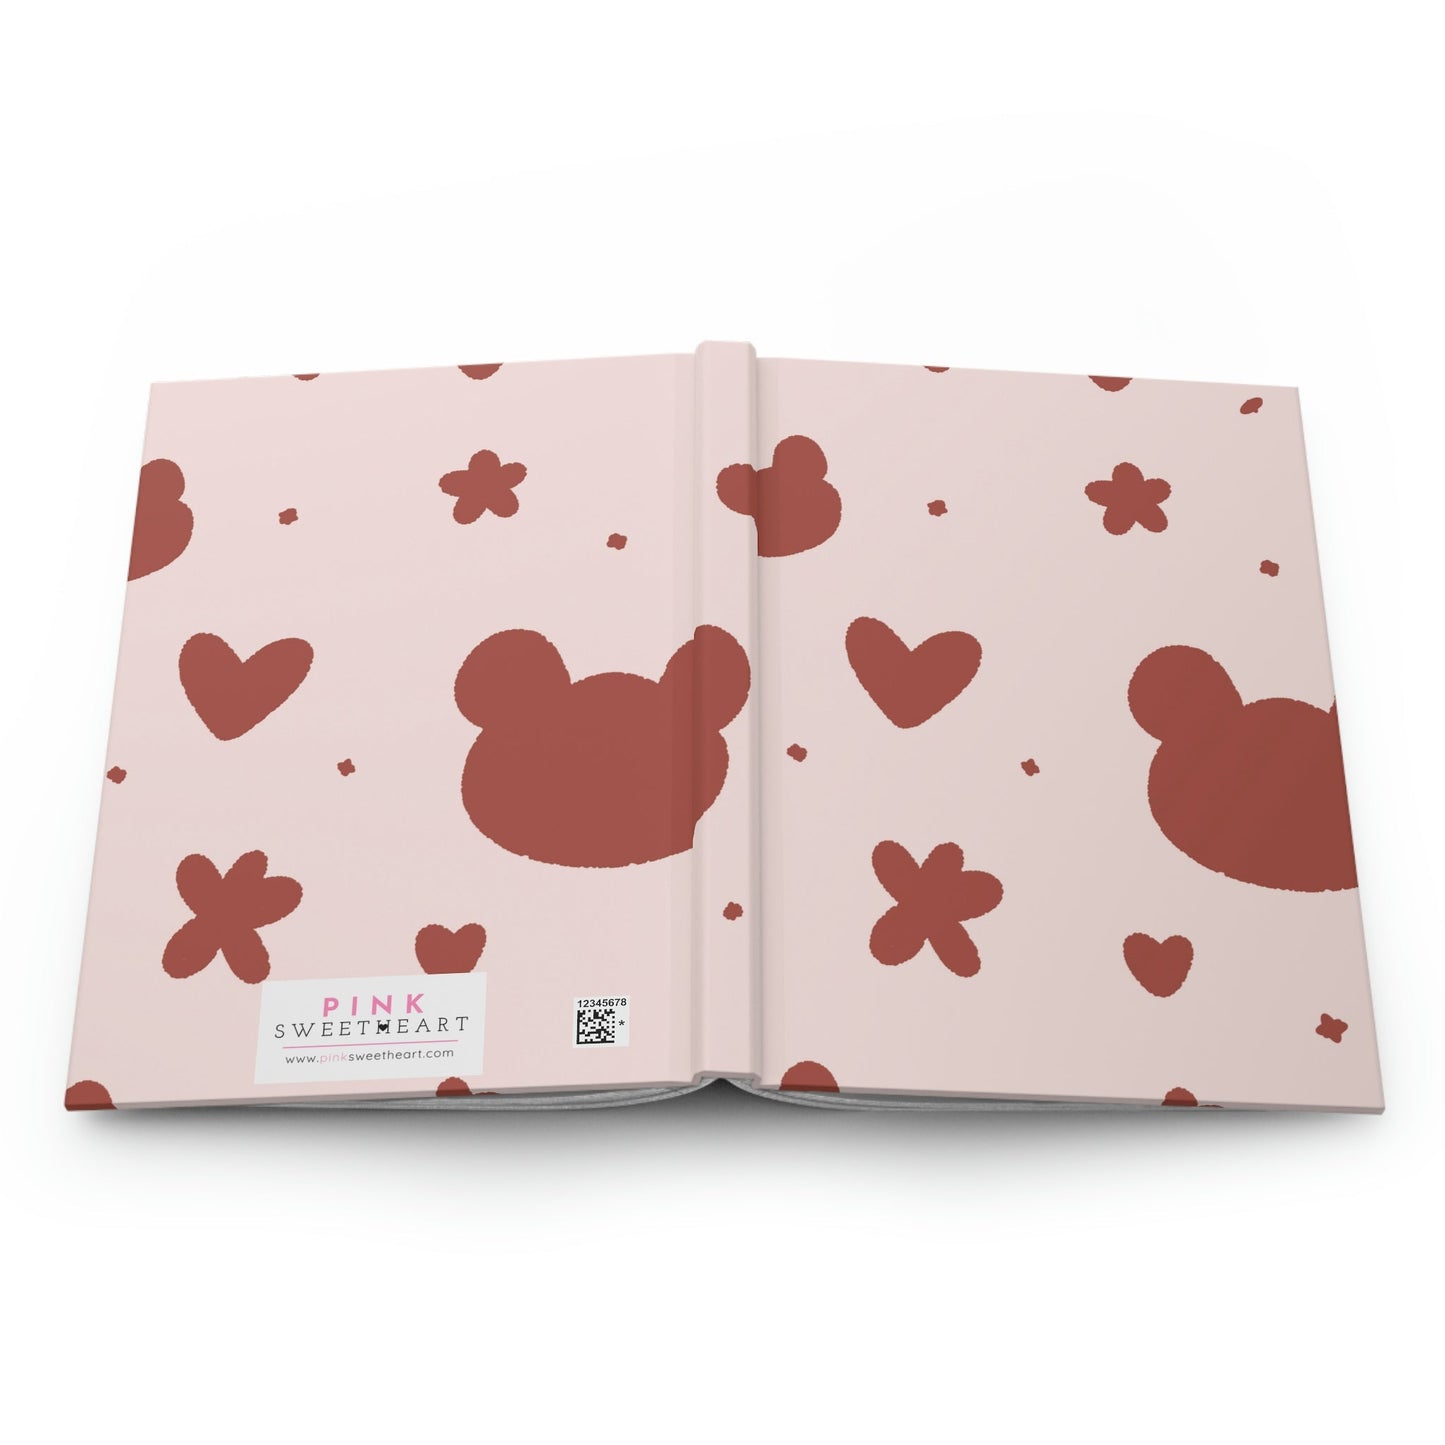 Cuddly Teddy Hardcover Matte Journal Paper products Pink Sweetheart